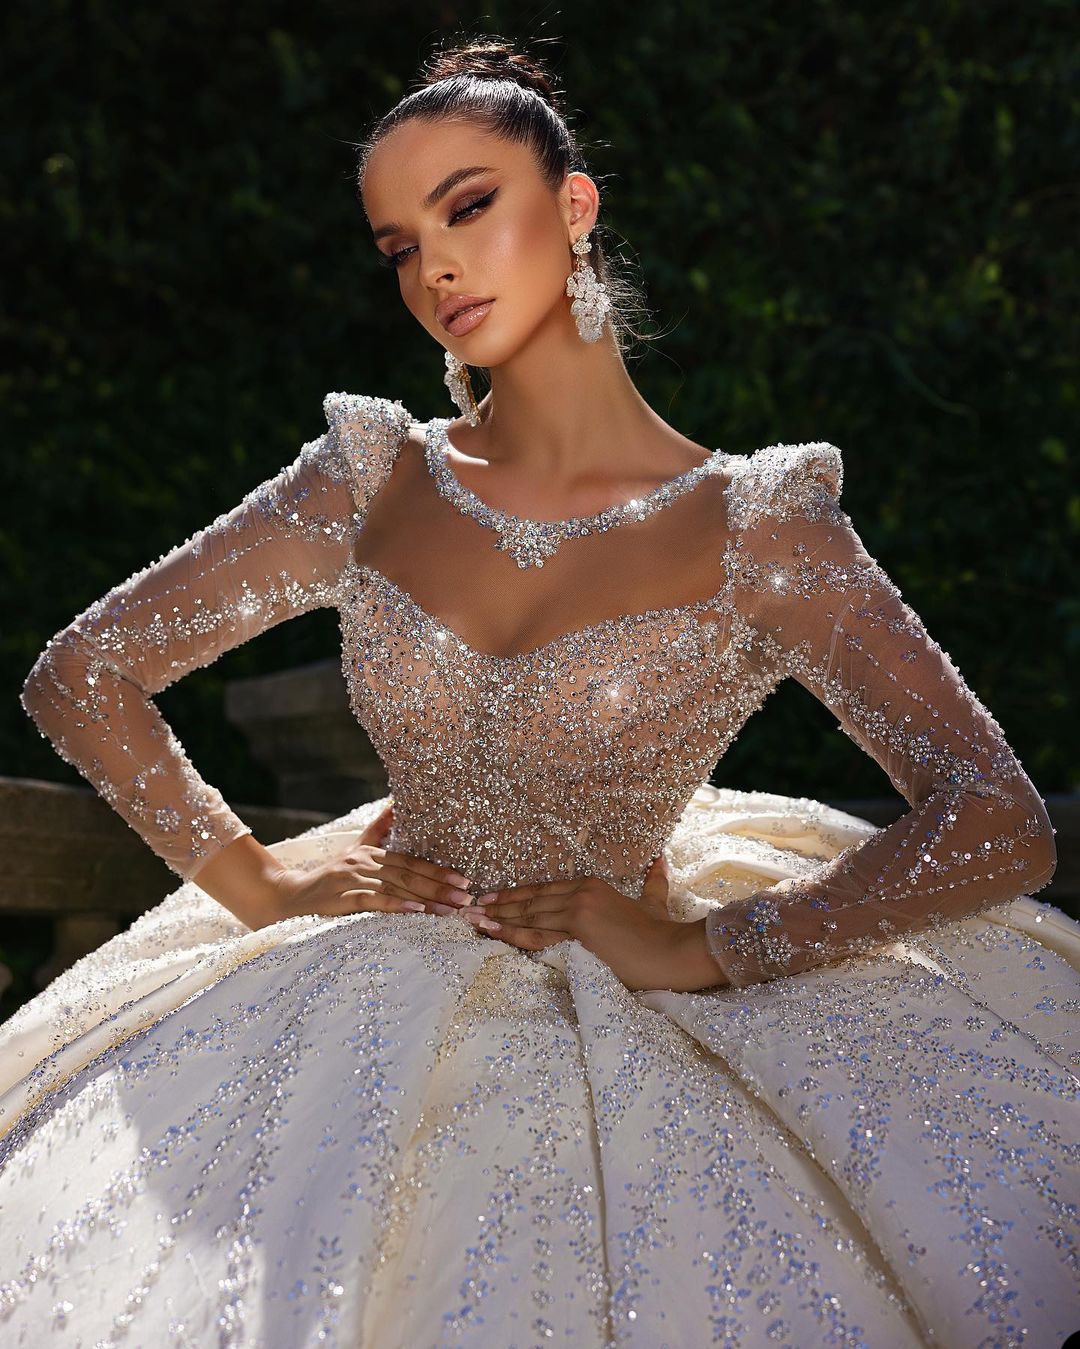 Princess Ball Gown Wedding Dresses V Neck Long Sleeves Lace Hollow Sequins Appliques Ruffles Floor Length Sparkling Luxury Bridal Gowns Plus Size robes de soiree